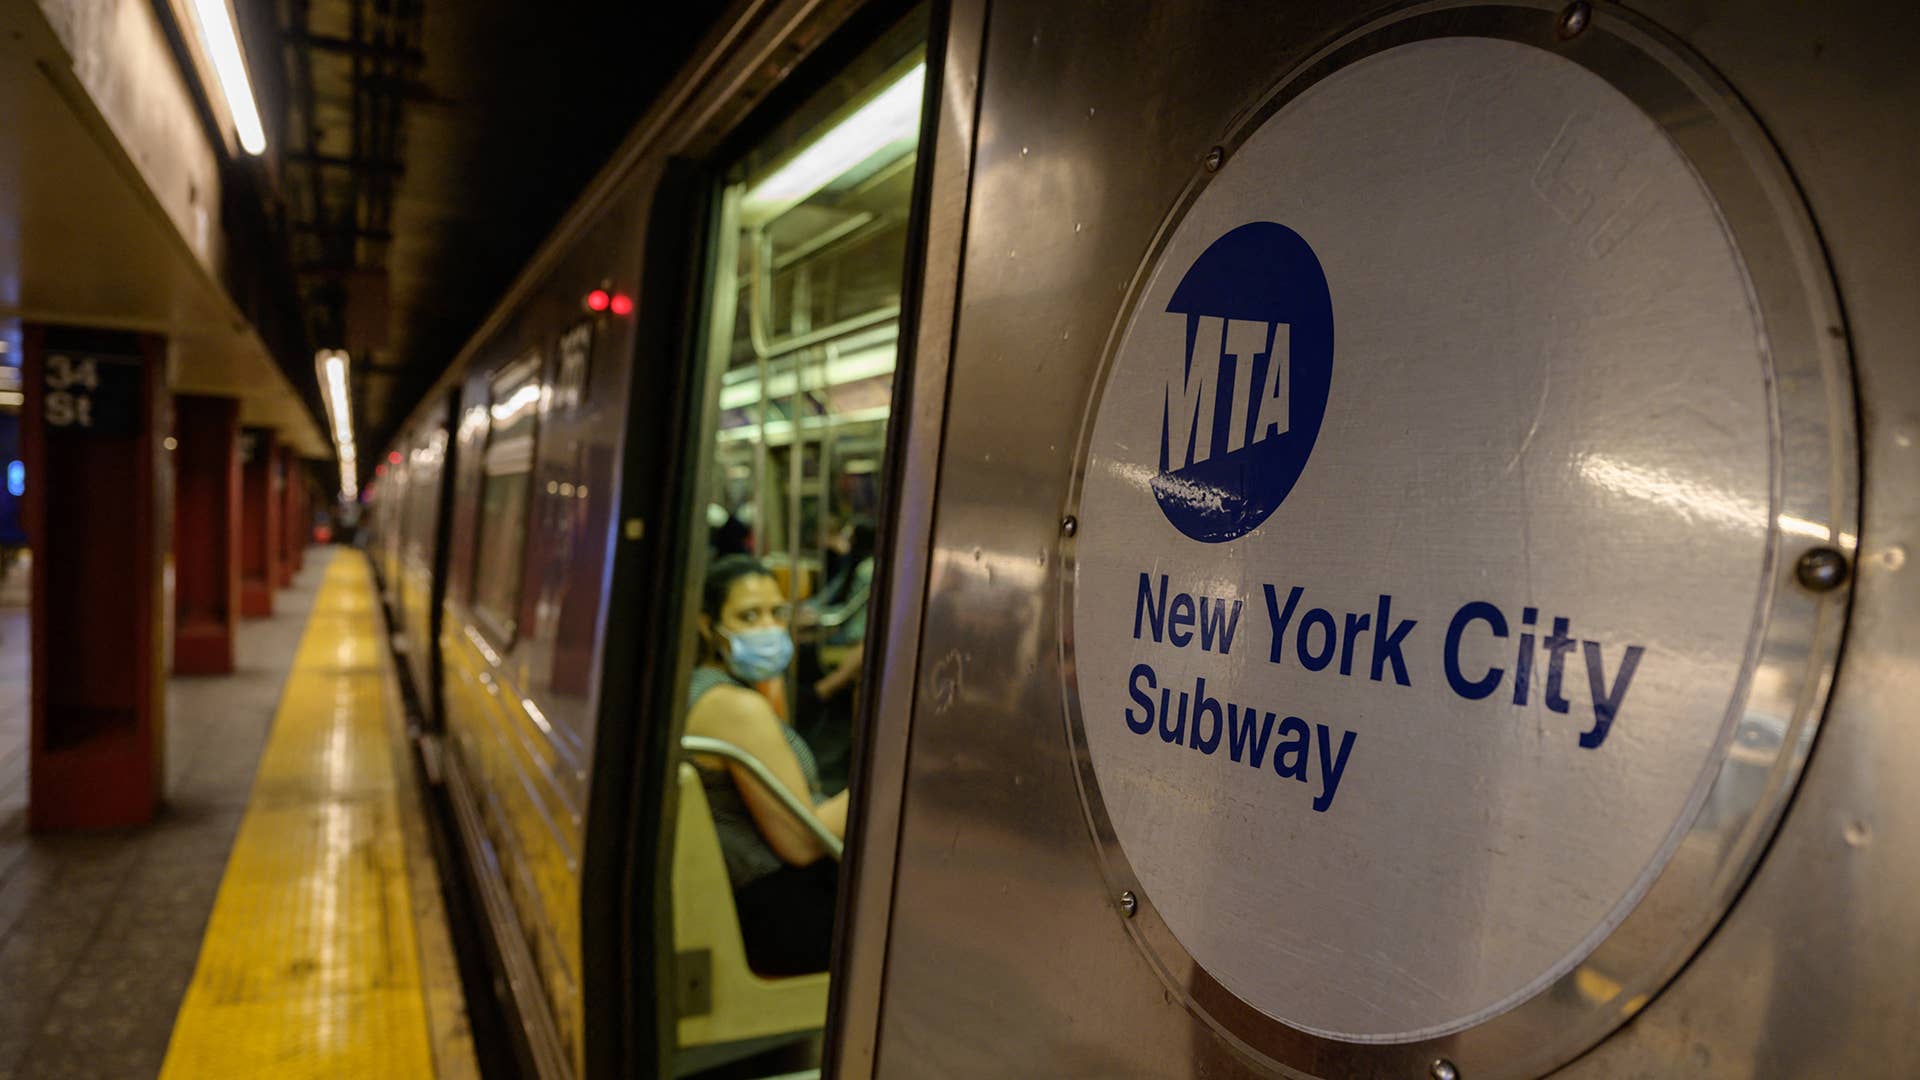 A Metropolitan Transportation Authority (MTA) logo is displayed on the side of a subway train in Manhattan, New York on June 2, 2021